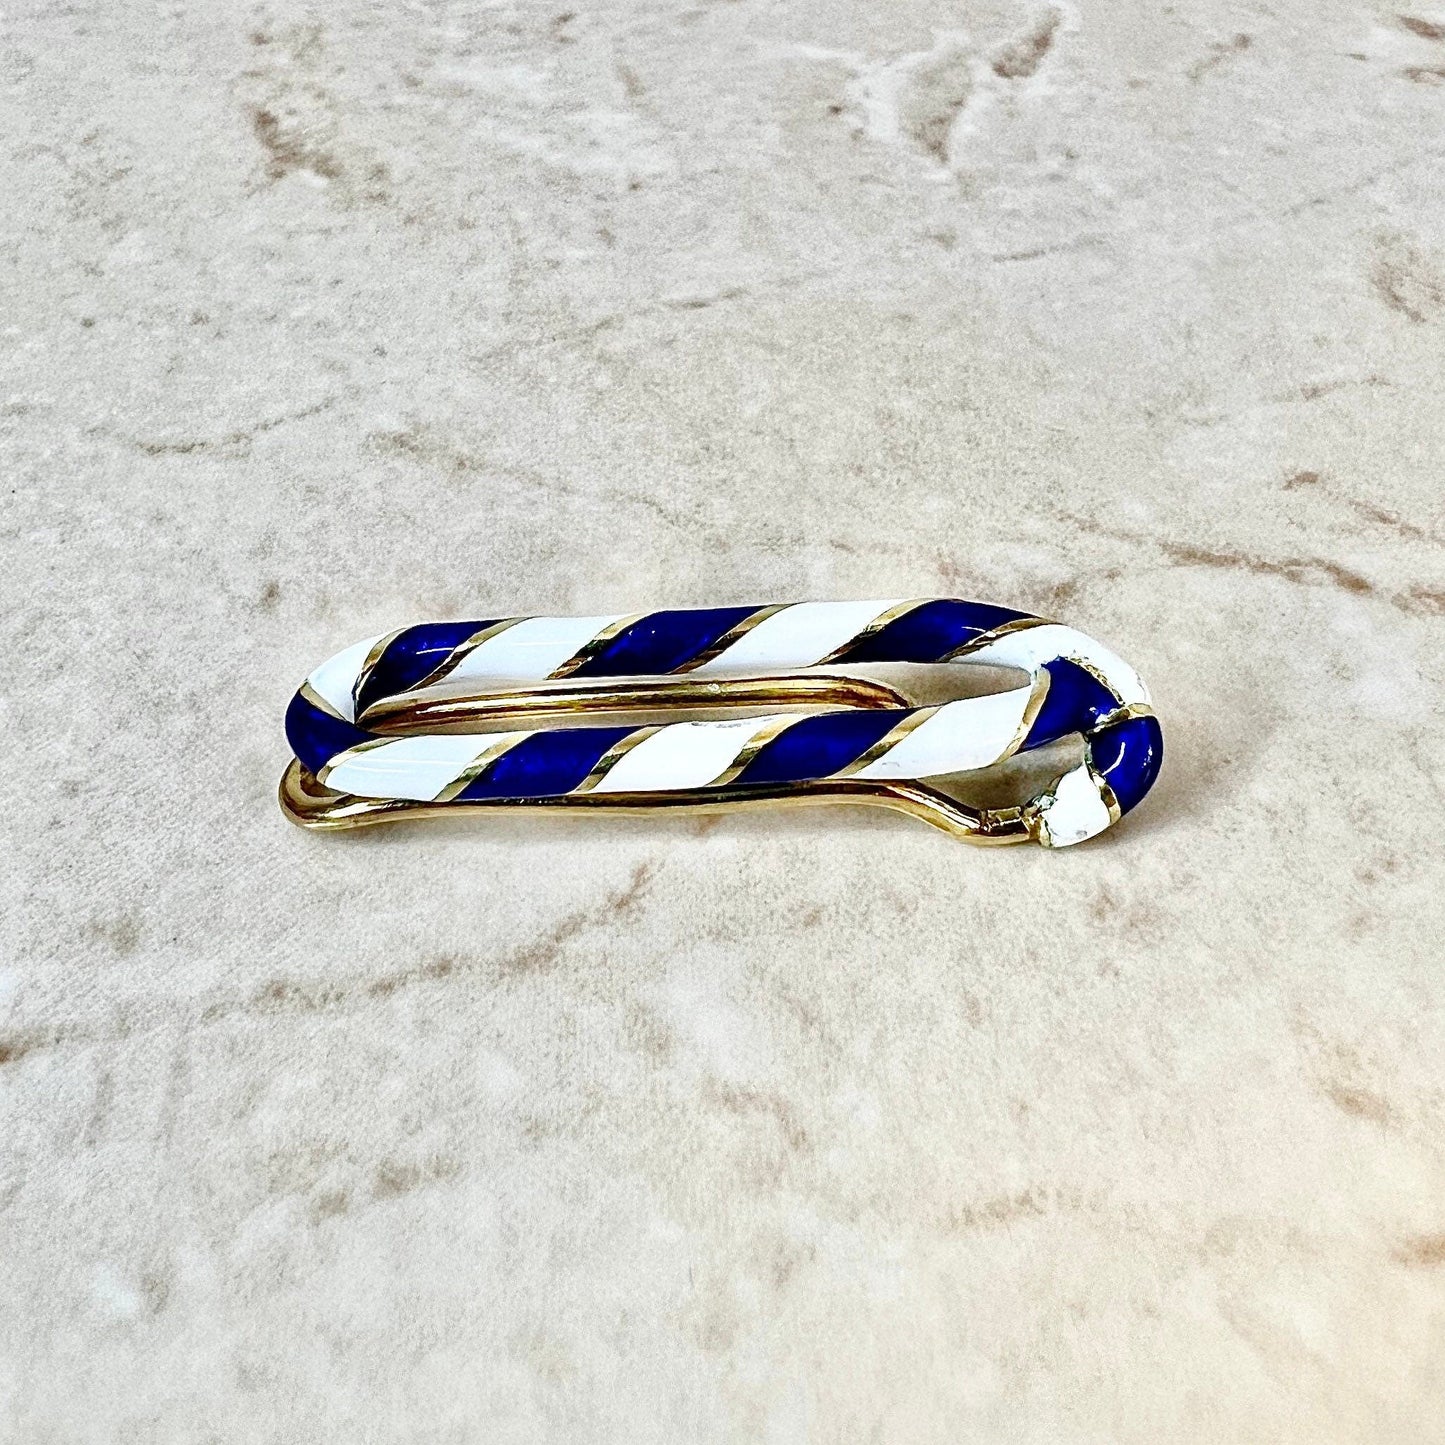 18K Vintage Tiffany Tie Clip - Tiffany Tie Bar - Yellow Gold Tie Clip - Gold Tie Bar - Best Gifts For Him - Tie Accessories - Gifts for Dad